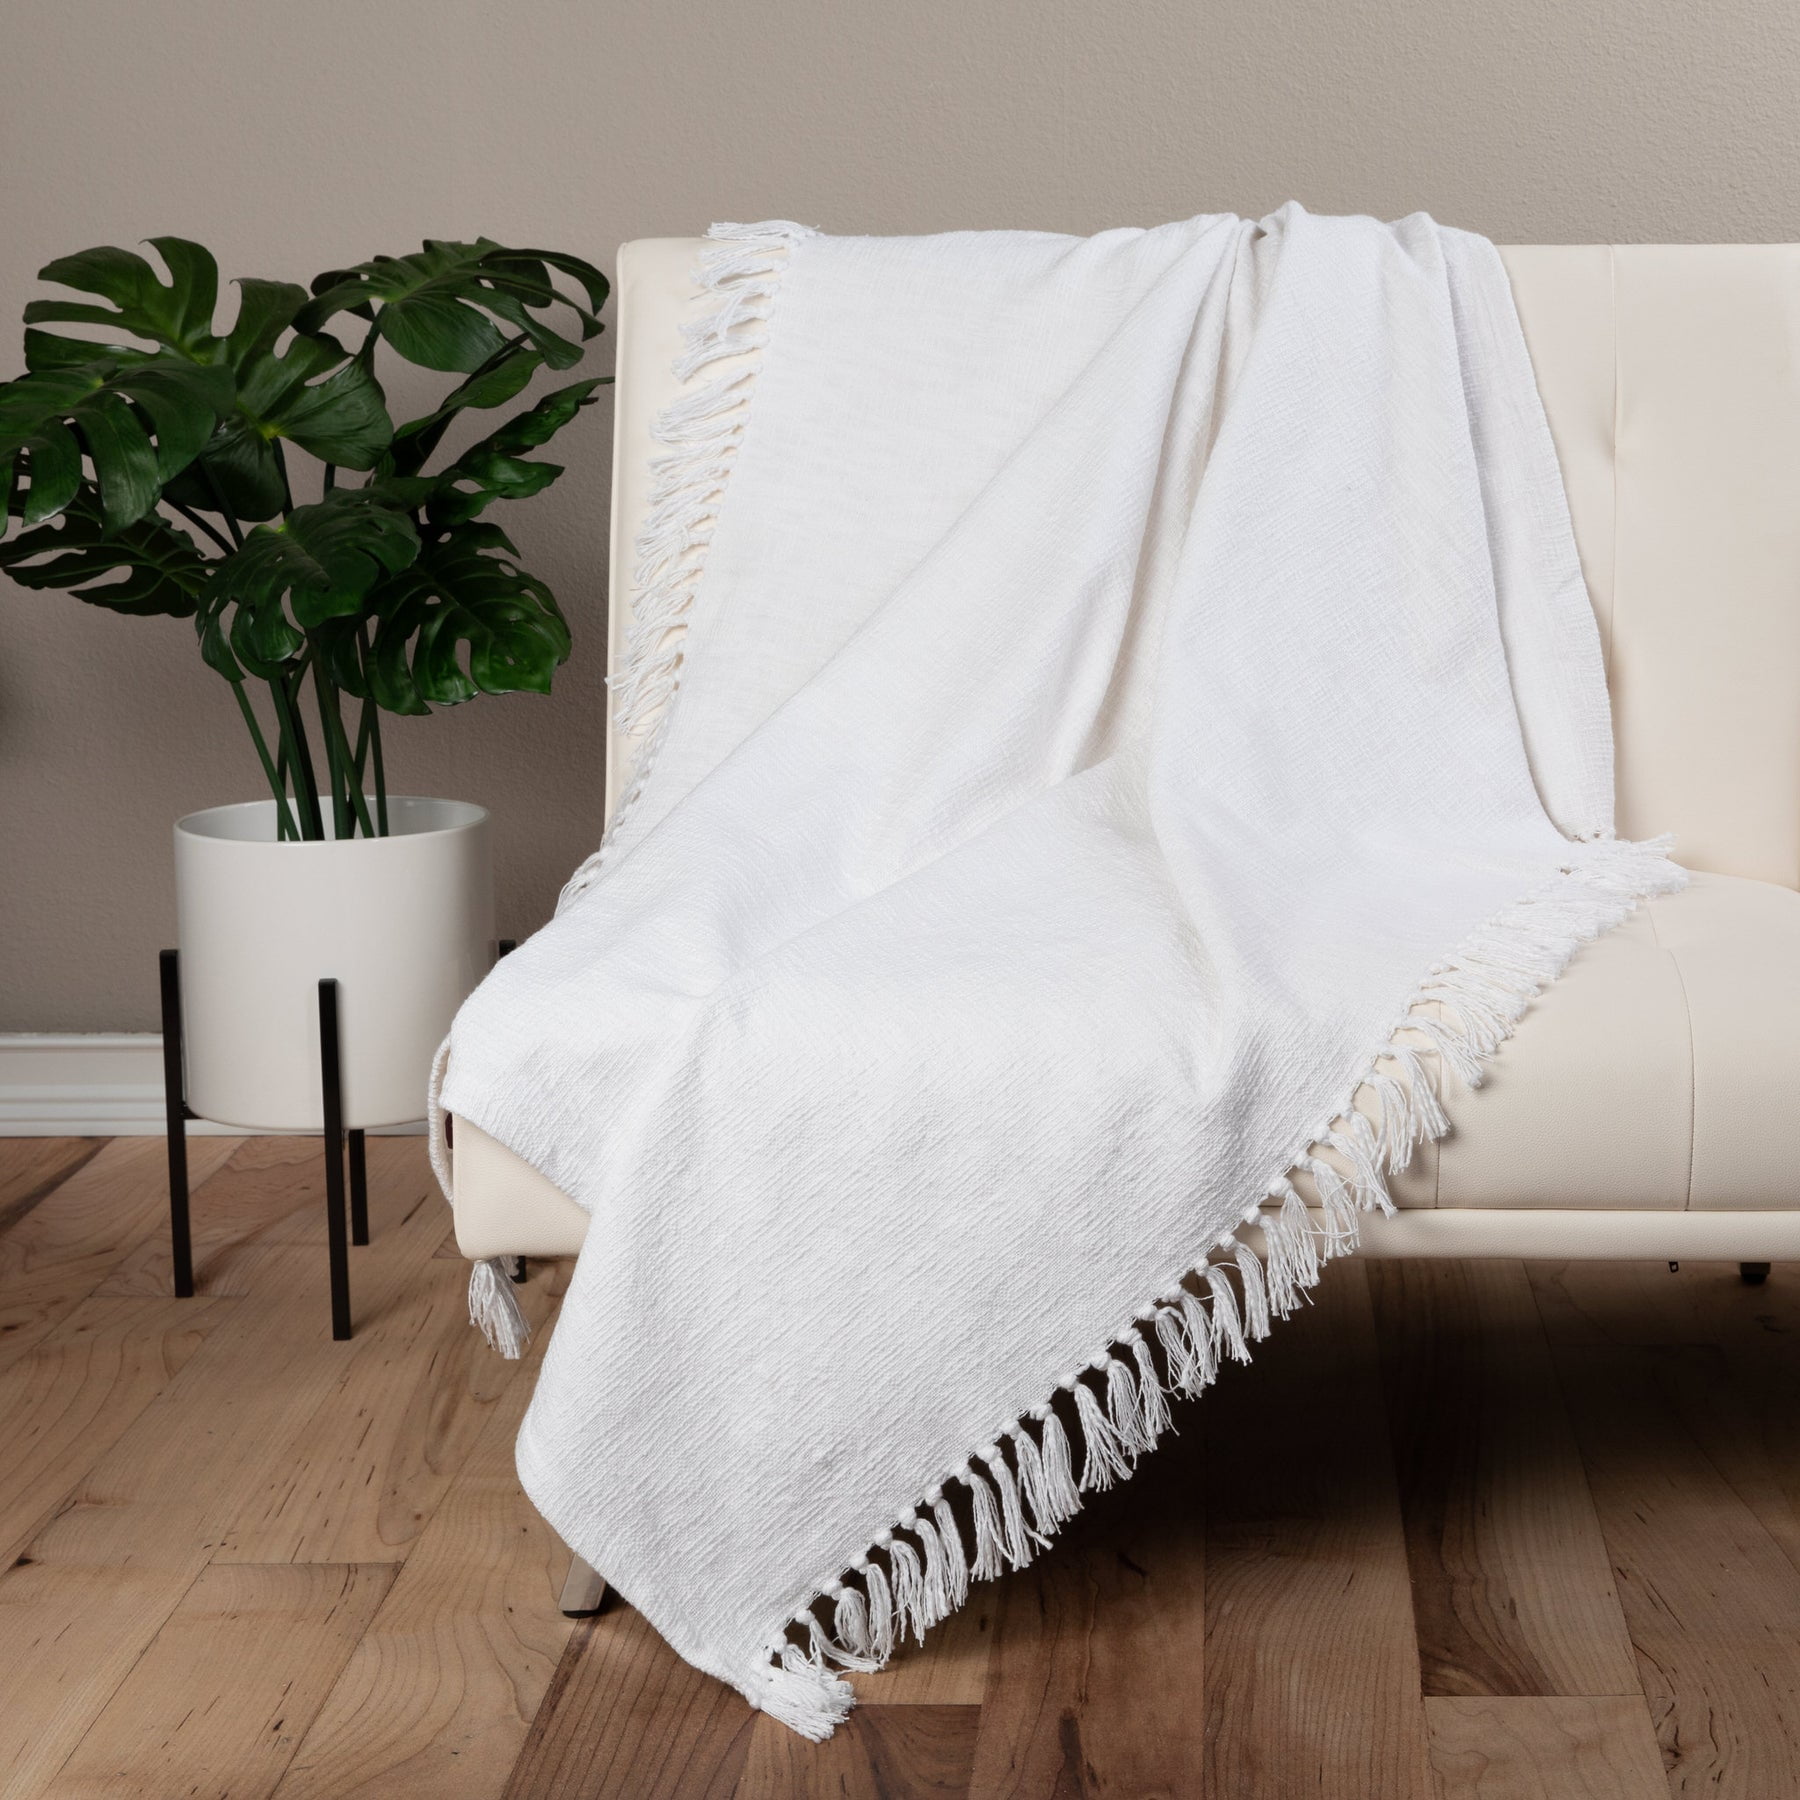 Sticky Toffee Cotton Throw Blanket for Couch, 60x50 in, Gray Boho